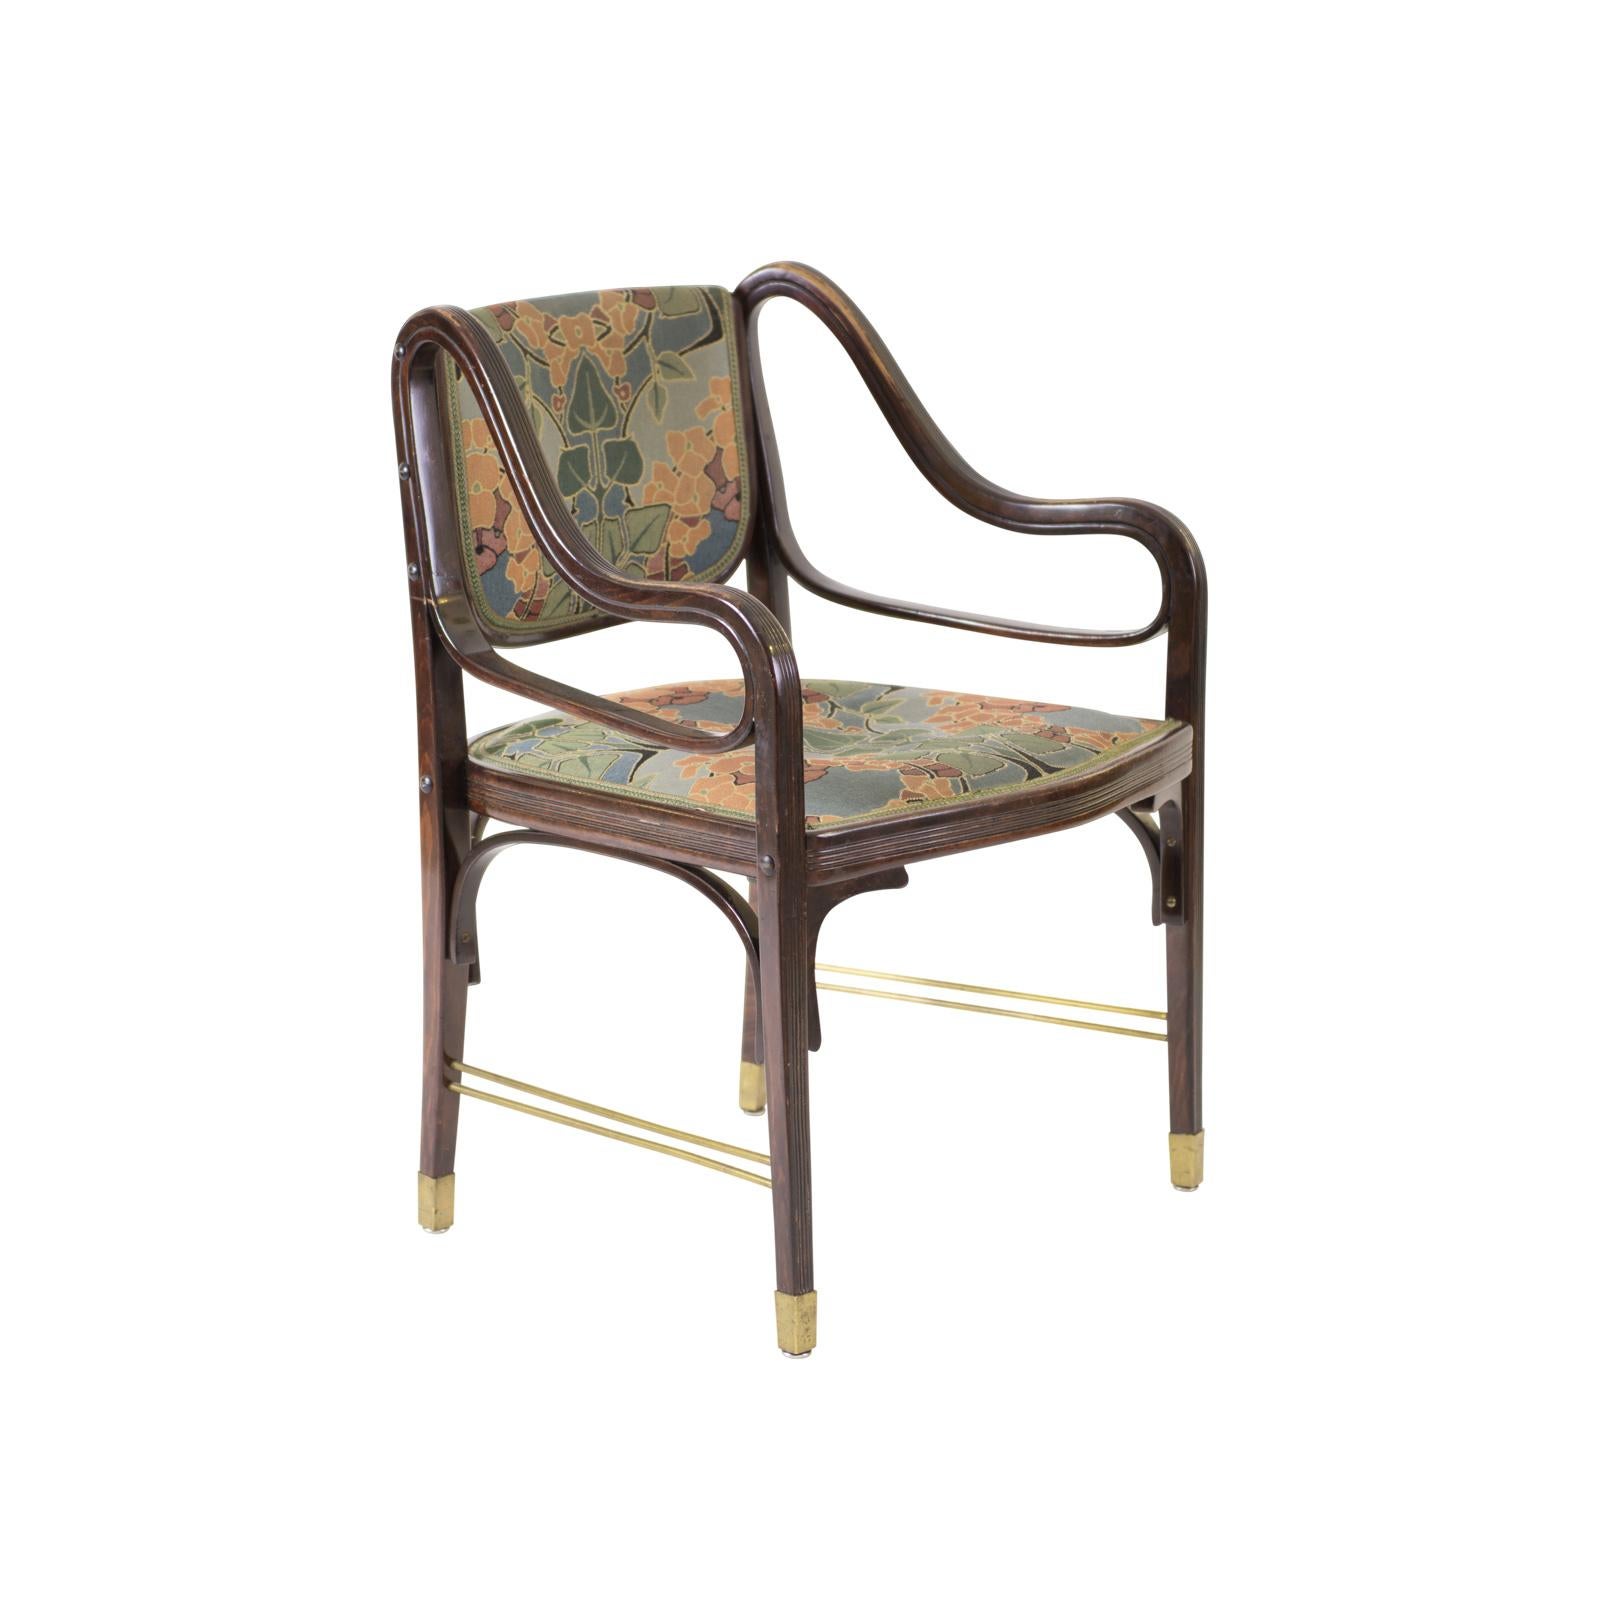 As pioneer and master of the Modern, Otto Wagner seized the then rather new technique of bending wood for his furniture designs.
Occasionally These furniture are attributed to Koloman Moser as well.
The design of this Ensemble dated back in 1901.